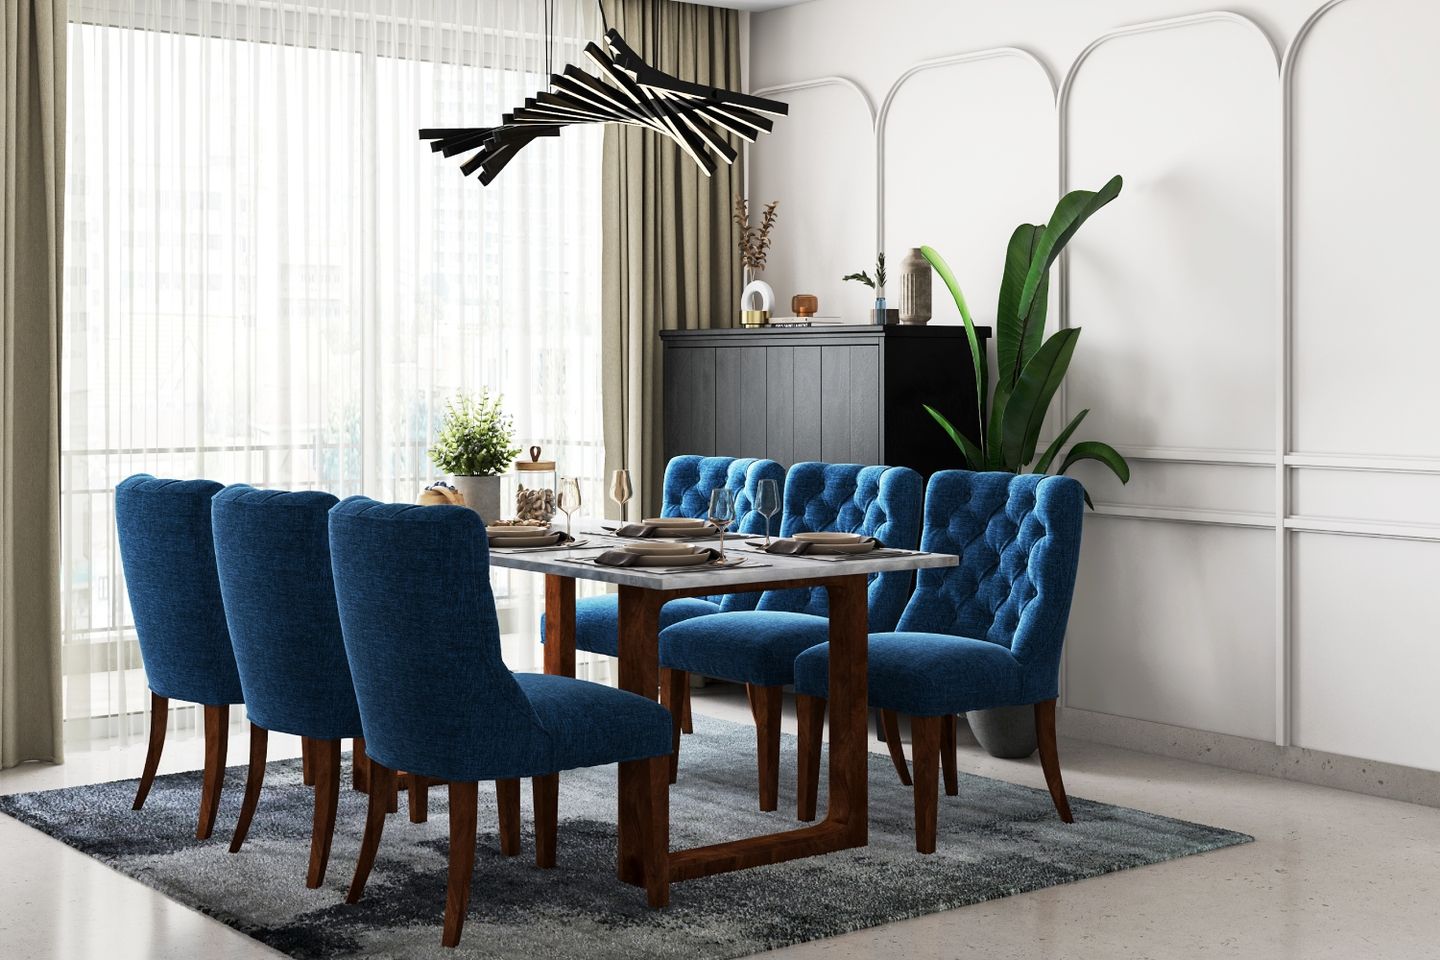 Modern 6-Seater Dining Room Design With Blue Upholstered Chairs